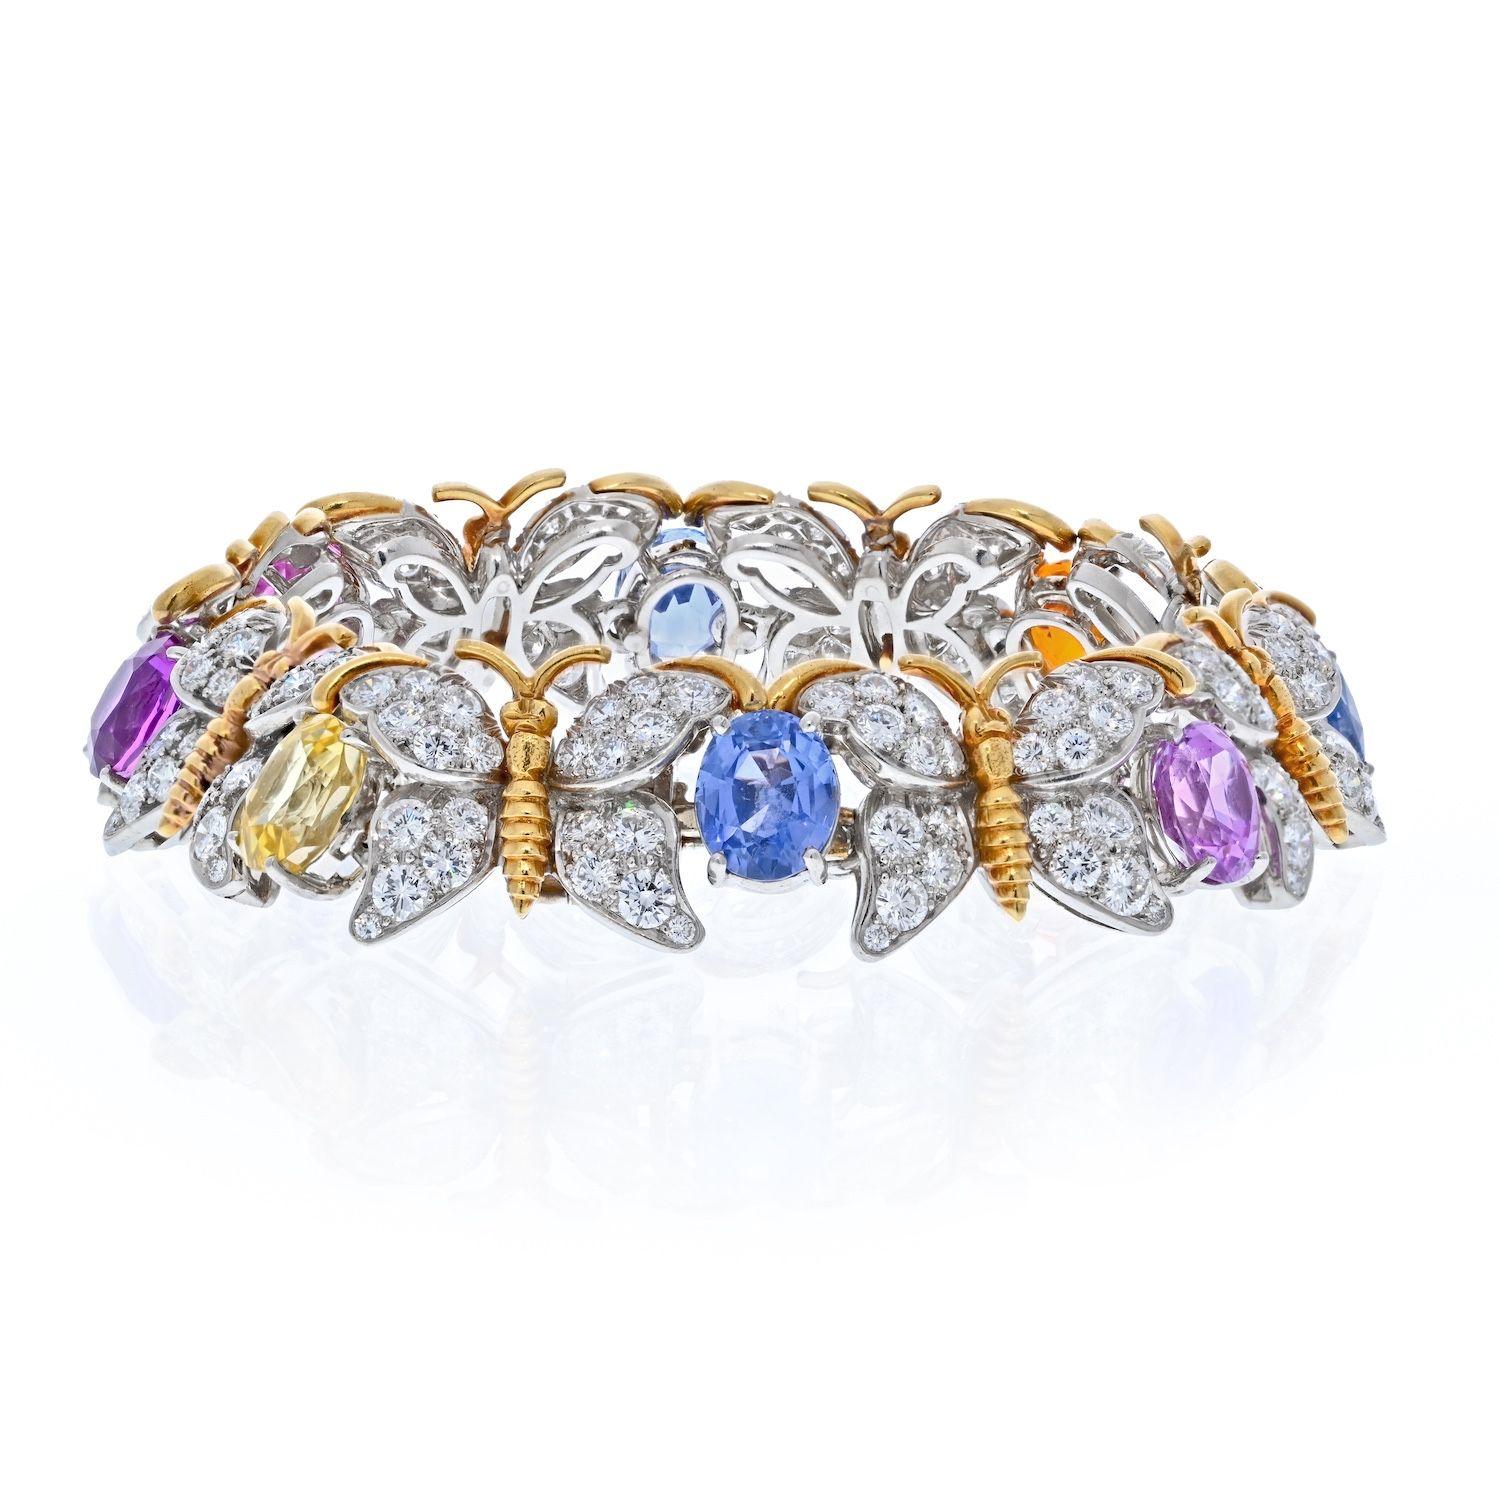 Jean Schlumberger Platinum & Gold Butterfly Motif Diamond and Gemstone Bracelet.

A sophisticated butterfly motif defines this platinum and 18k gold design that shines with dazzling gems and diamonds. From the extraordinary collection of Tiffany's